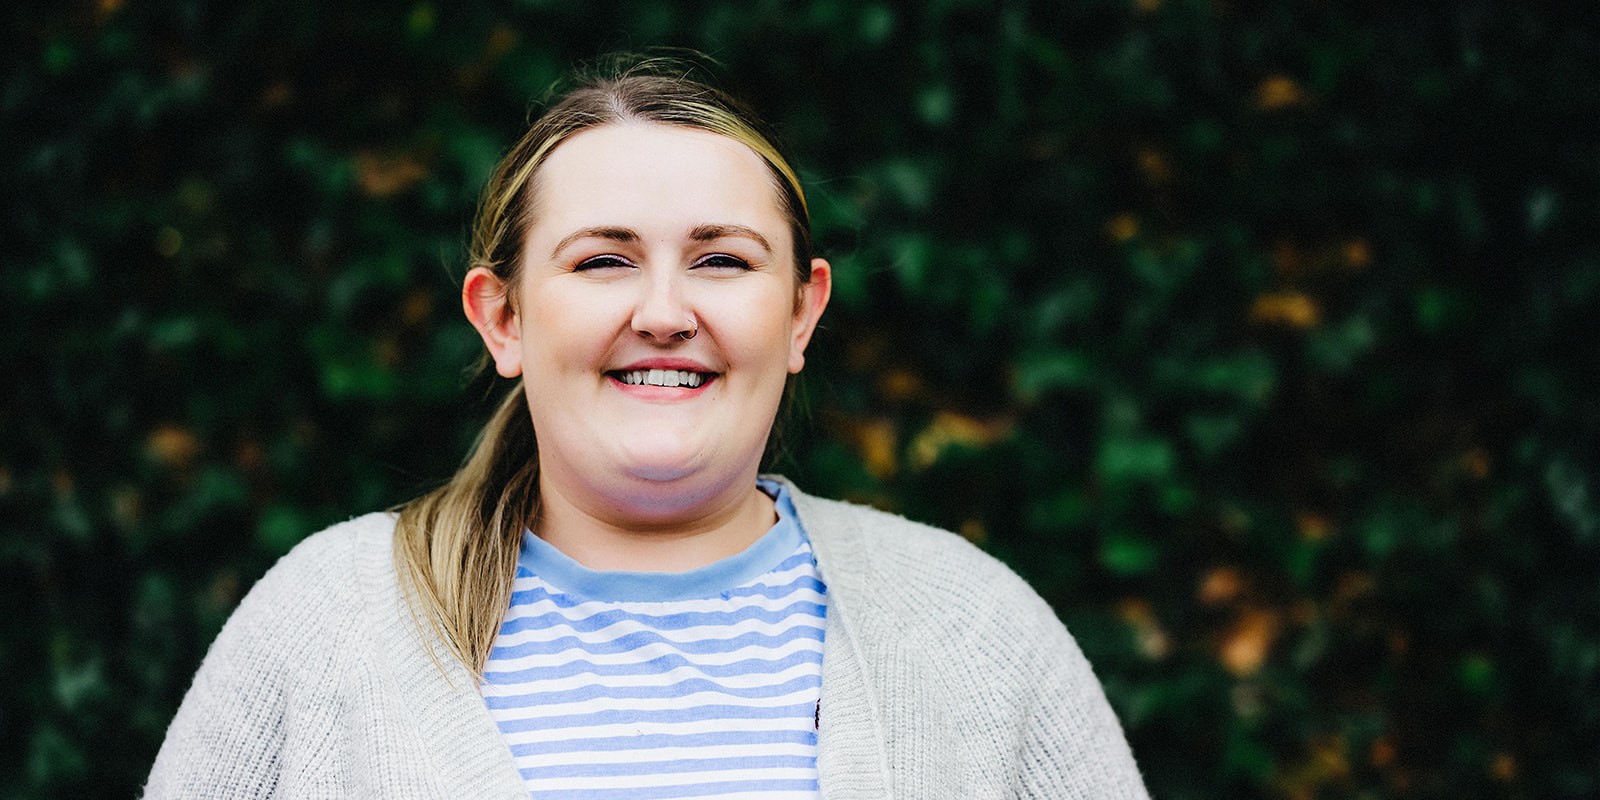 Zoe Adkins: My ClickThrough growth story - from Web Design Apprentice to Client Director